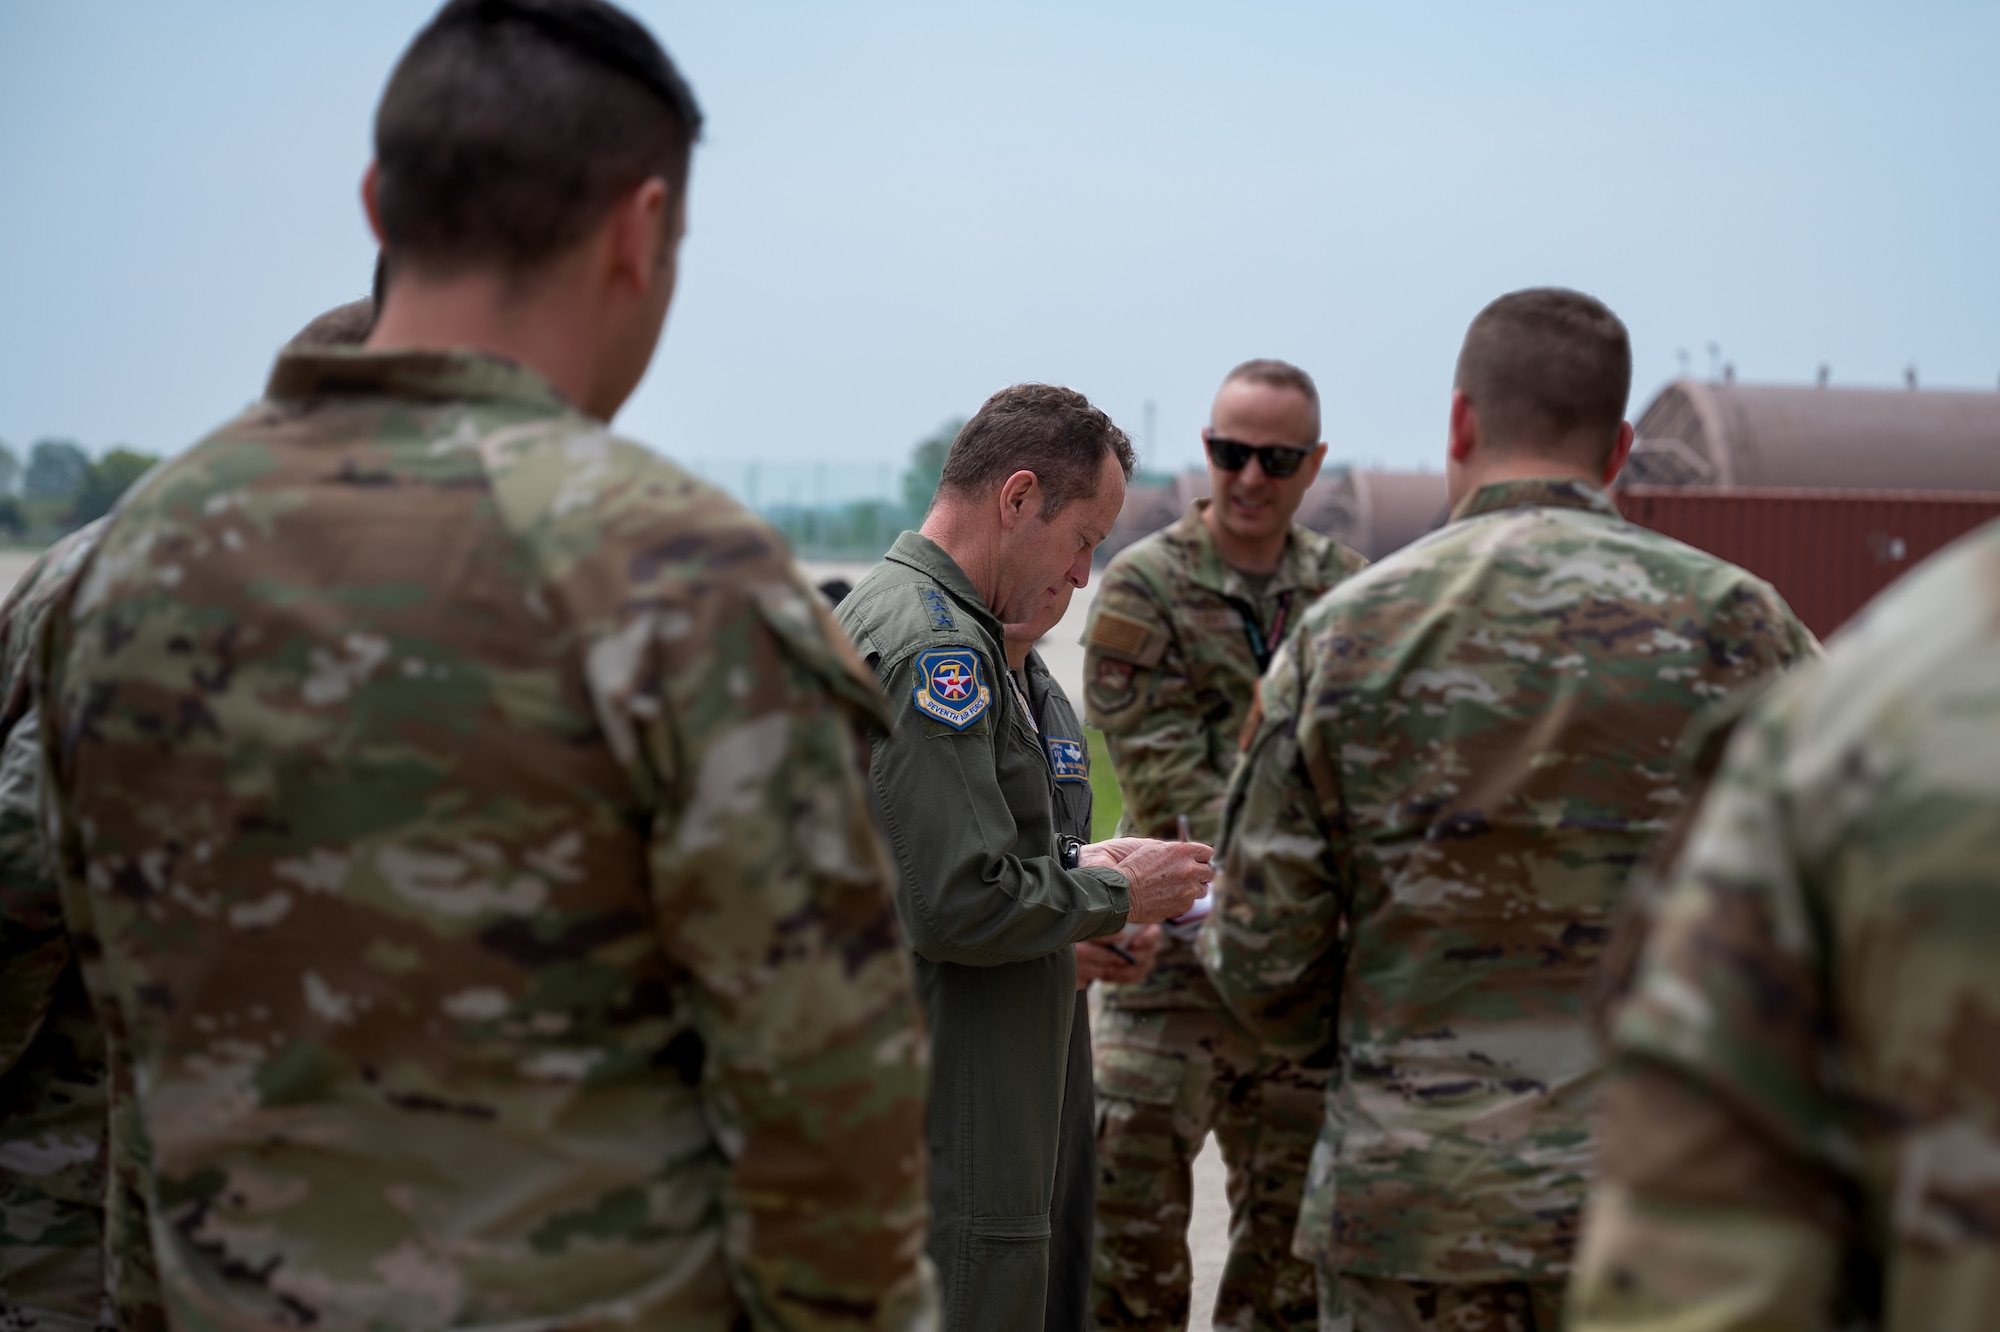 U.S. Air Force Lt. Gen. David R. Iverson, Seventh Air Force commander, meets with Airmen at Osan Air Base, Republic of Korea, April 22, 2024. The Seventh Air Force’s familiarization with the 51st Fighter Wing’s operations enhances the ability to “Fight Tonight” by providing strategic insights and fostering direct support for operational readiness. (U.S. Air Force photo by Senior Airman Brittany Russell)